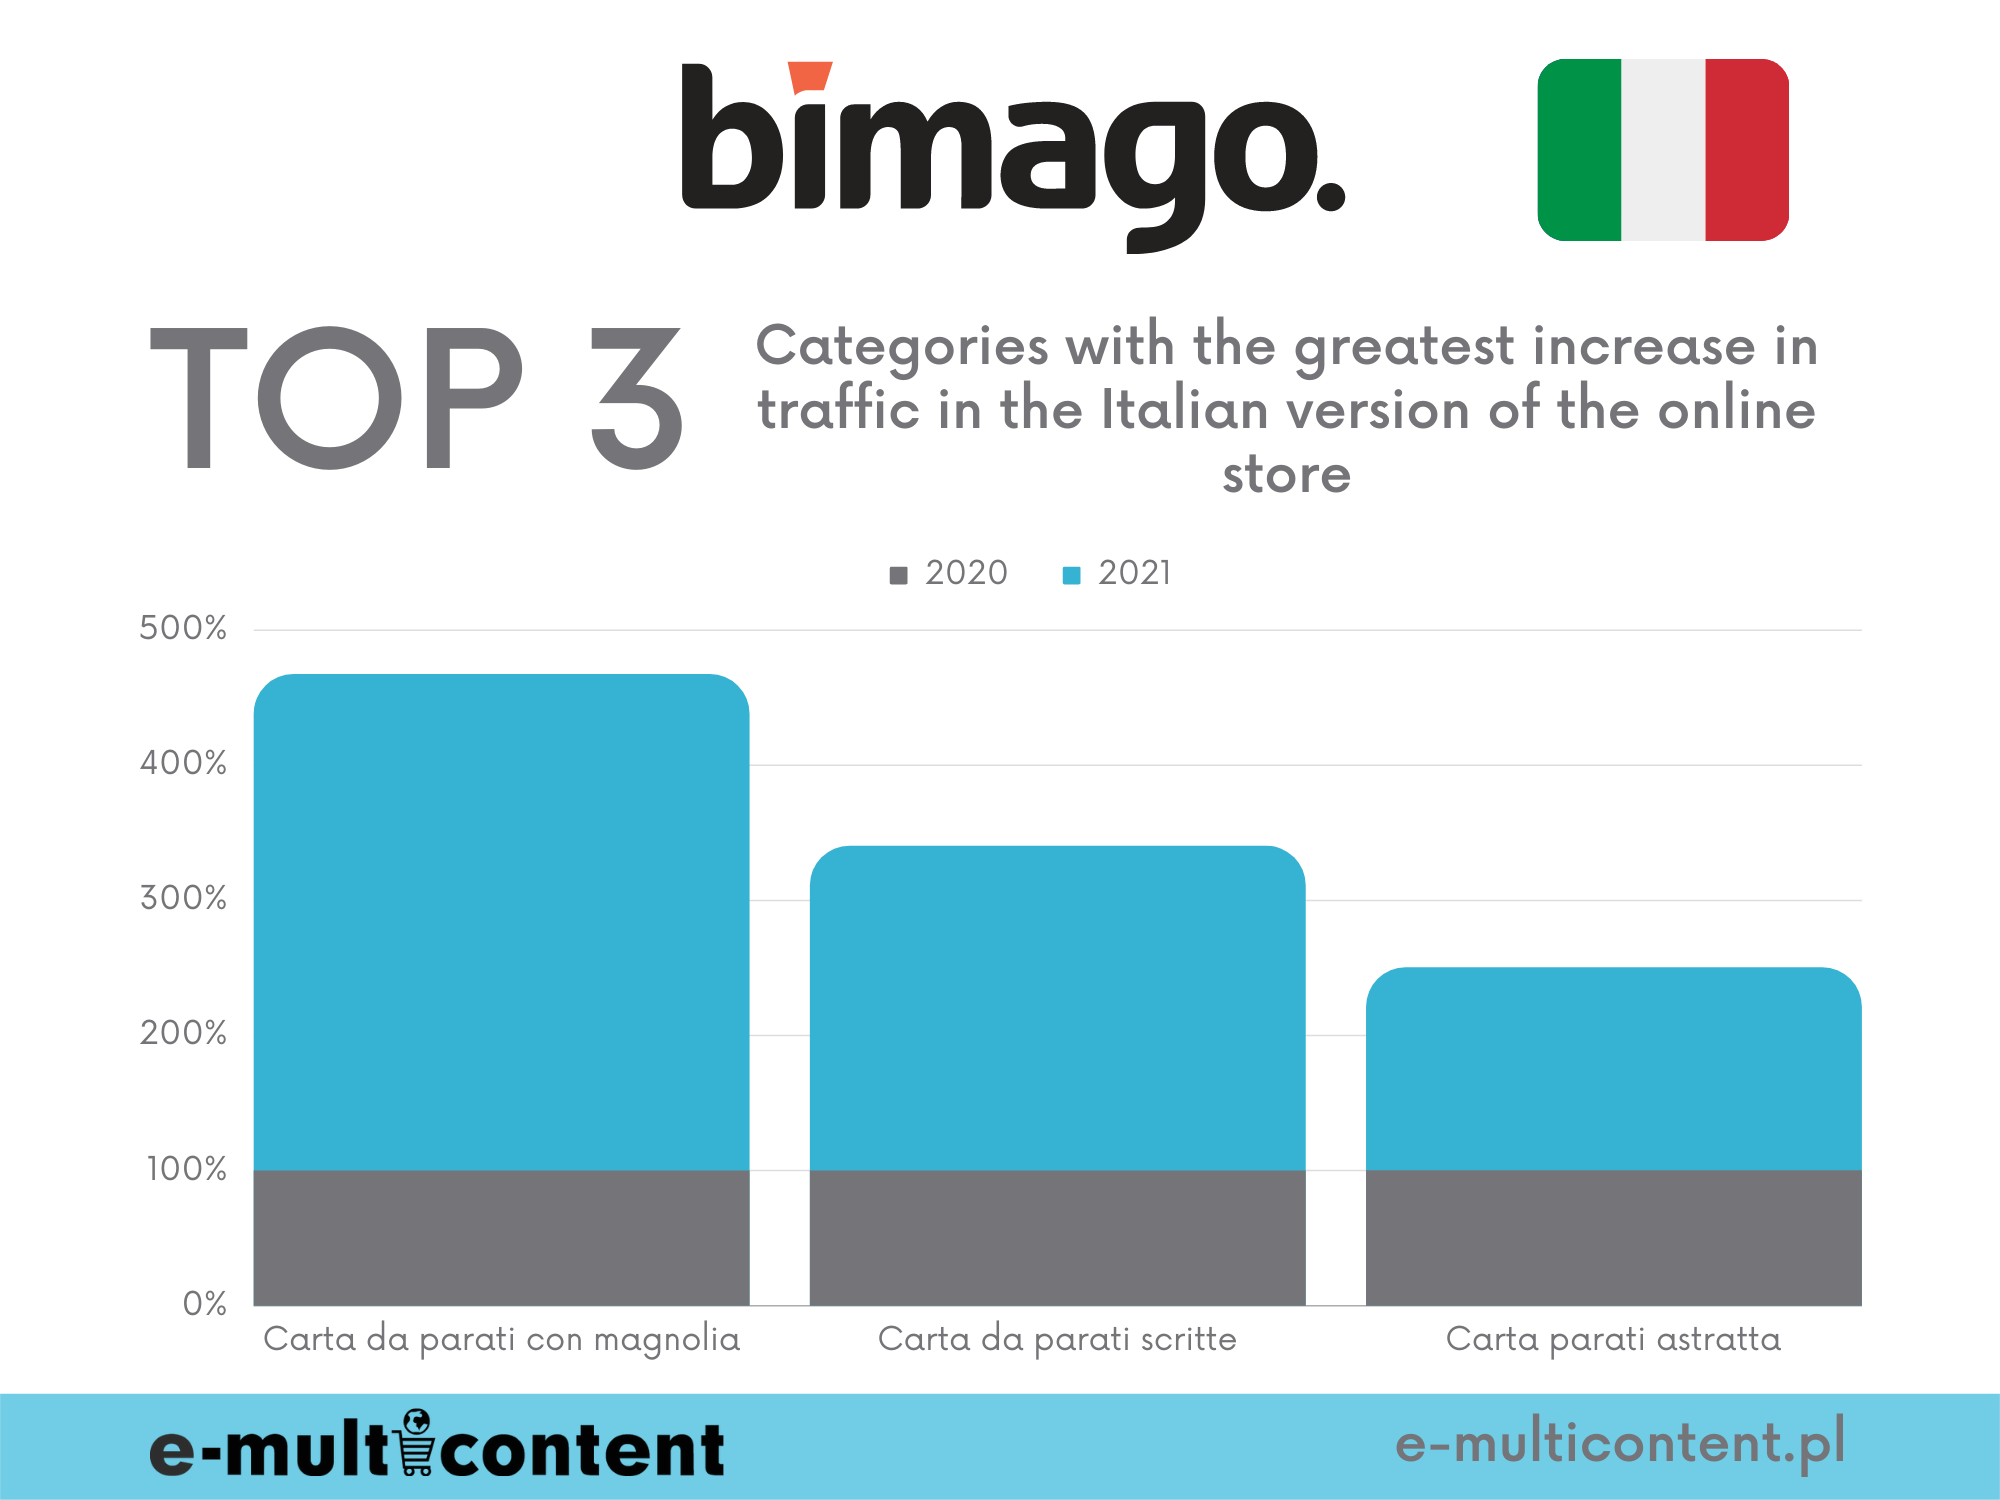 Categories with the highest increase in traffic - bimago.it